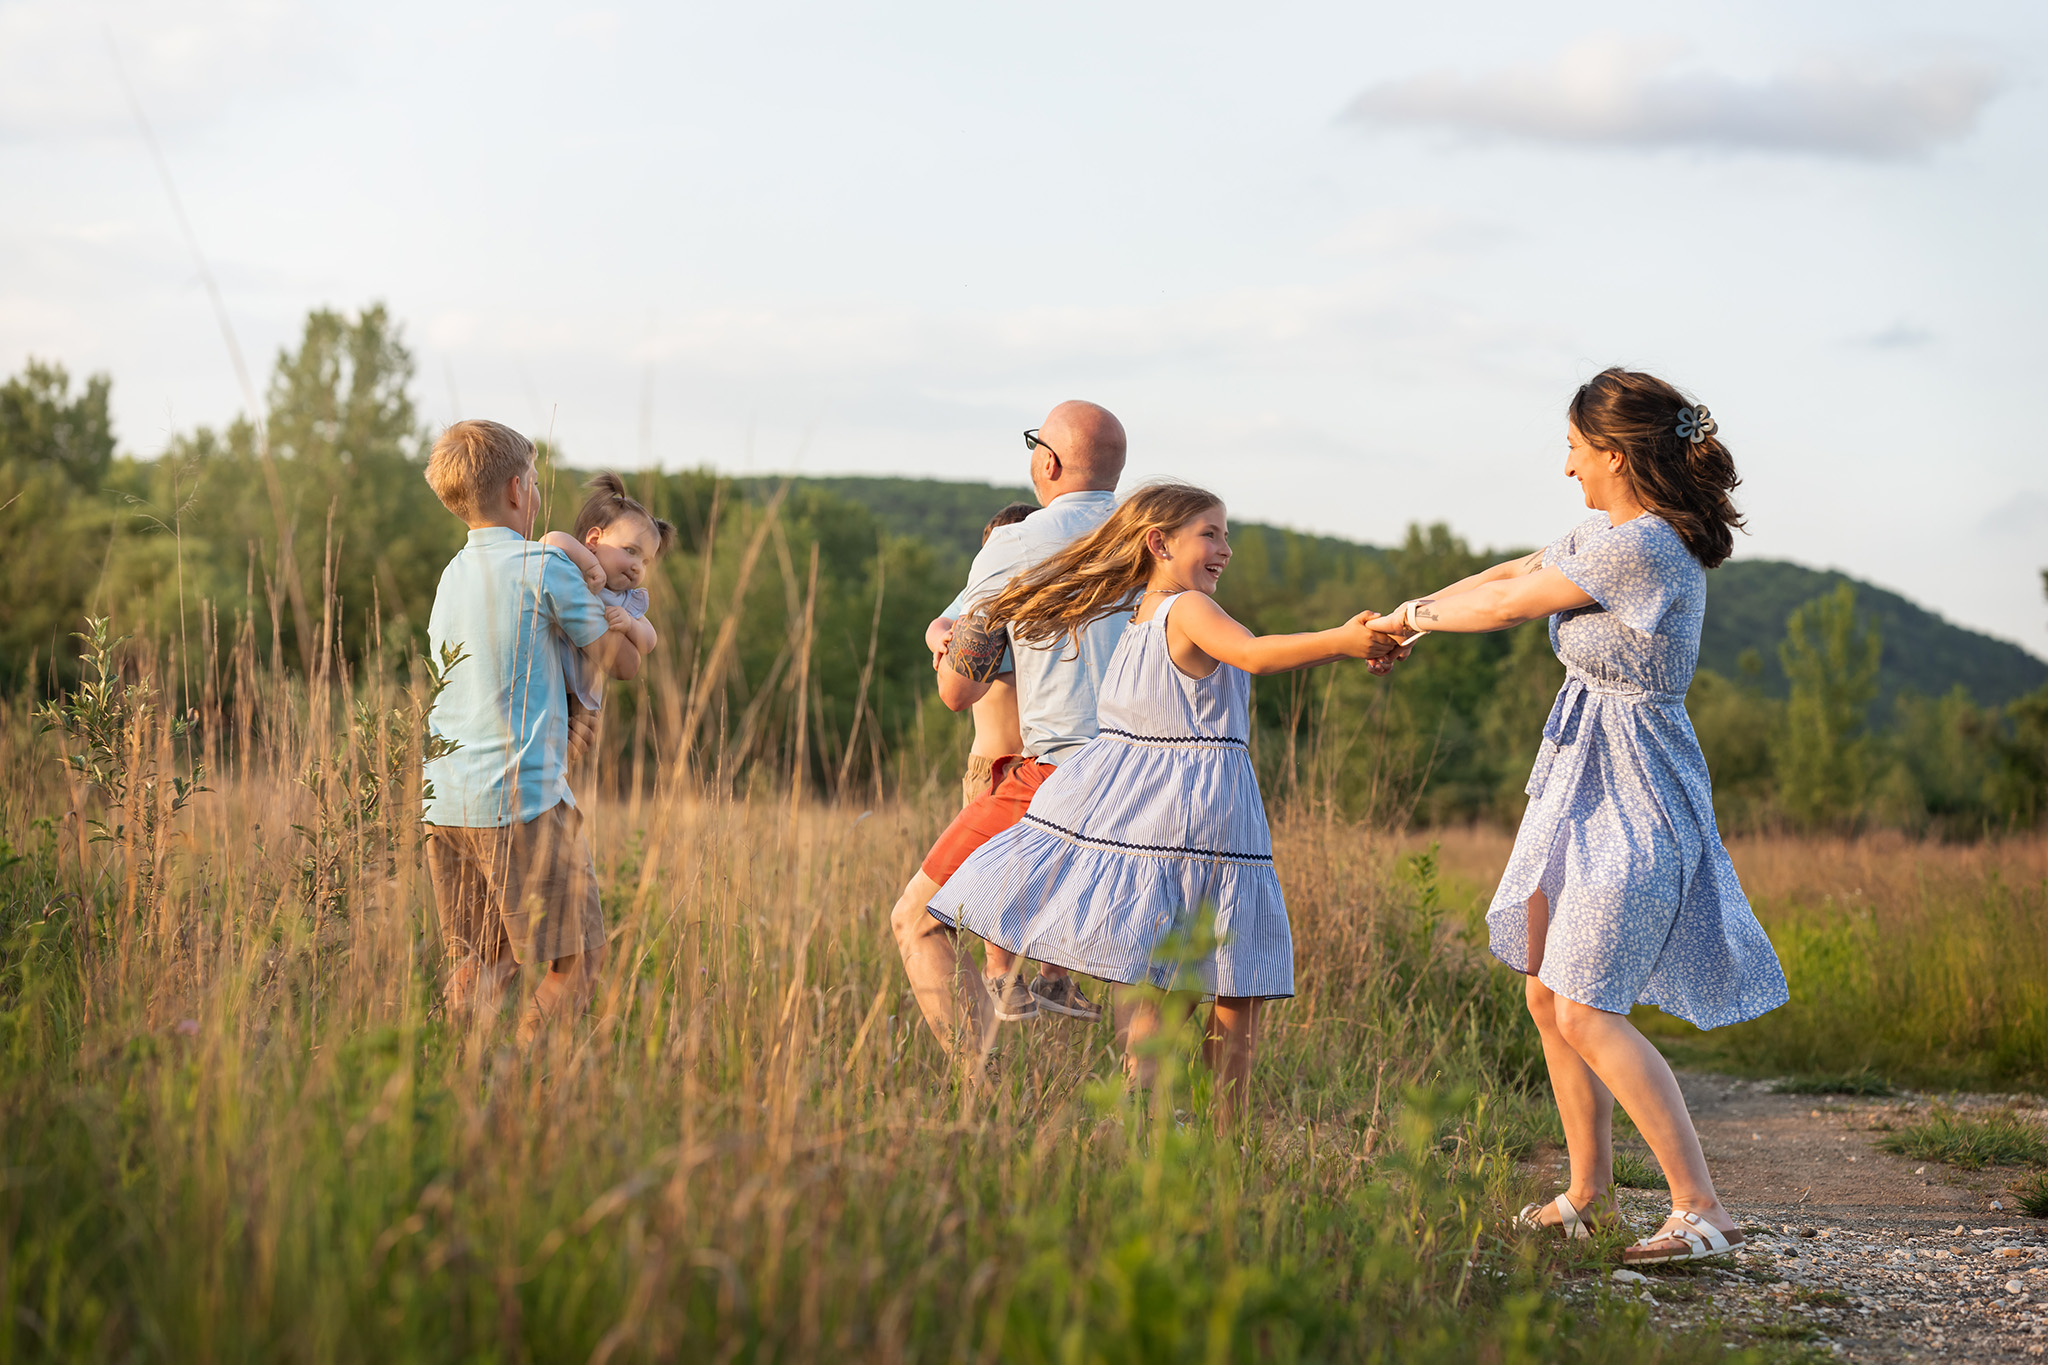 A mother and young daughter dance in a field at sunset with the rest of their family behind them